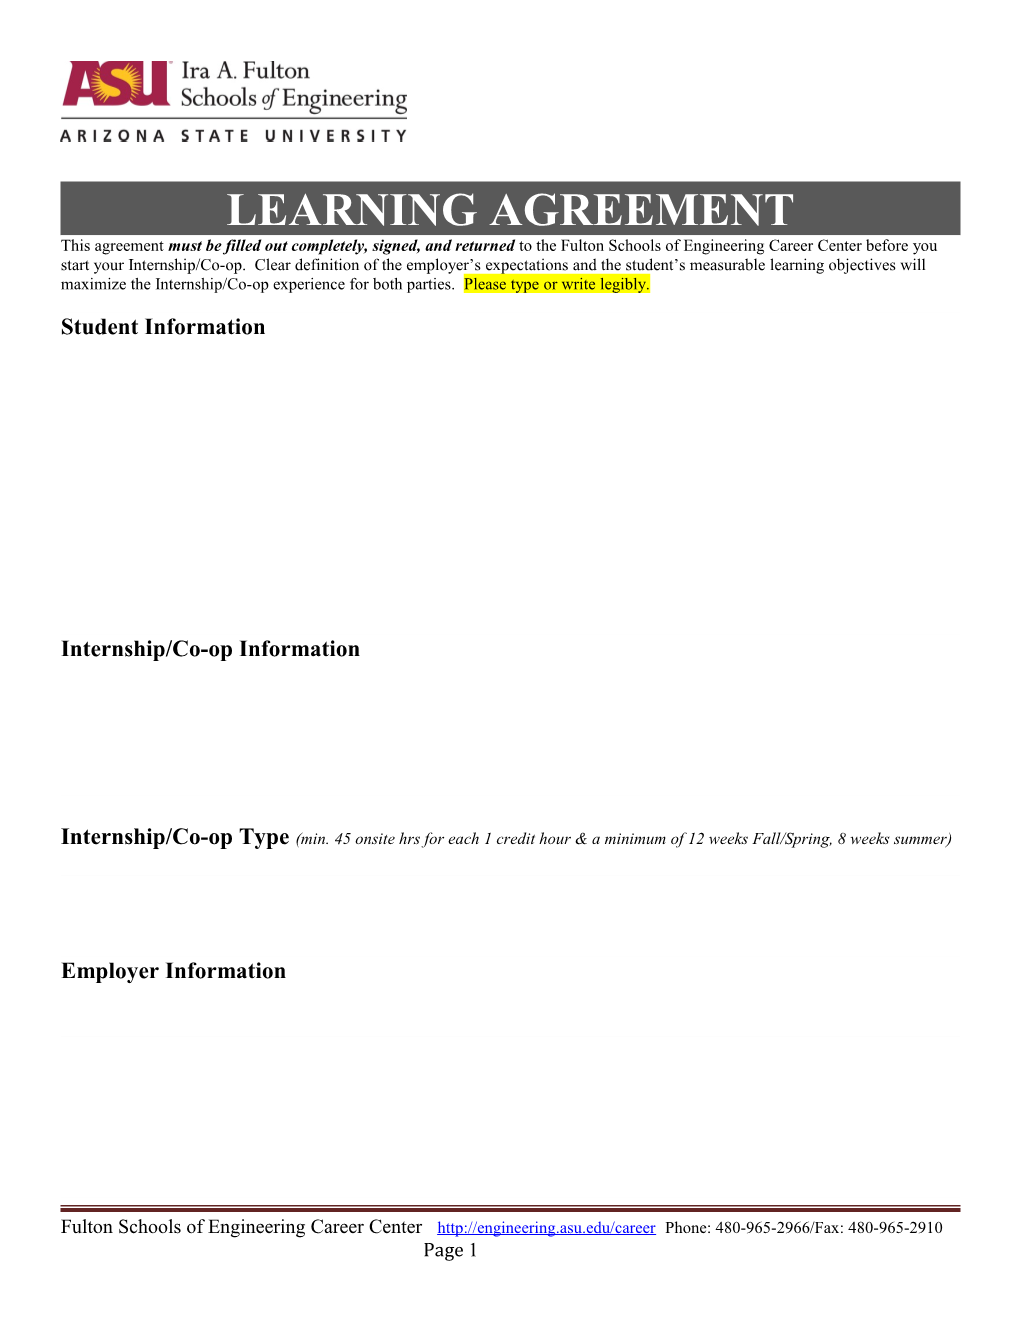 Learning Agreement